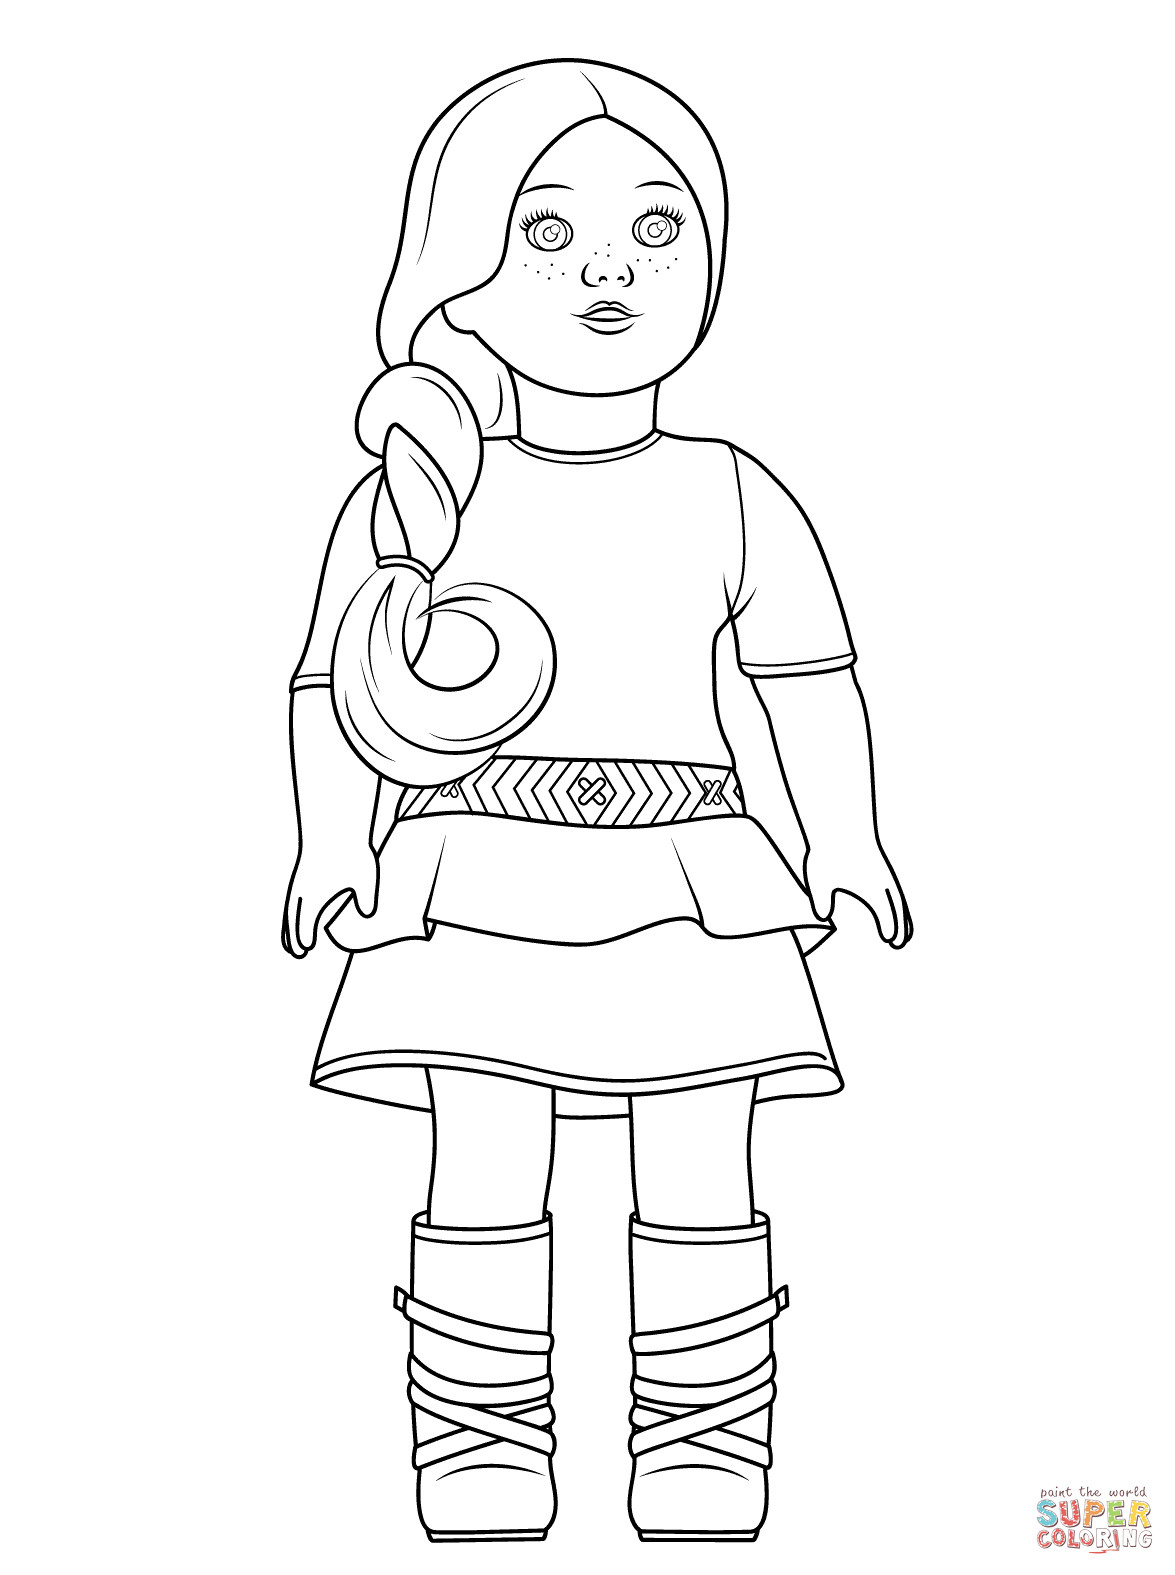 American Girl Coloring Pages To Print
 American Girl Saige coloring page